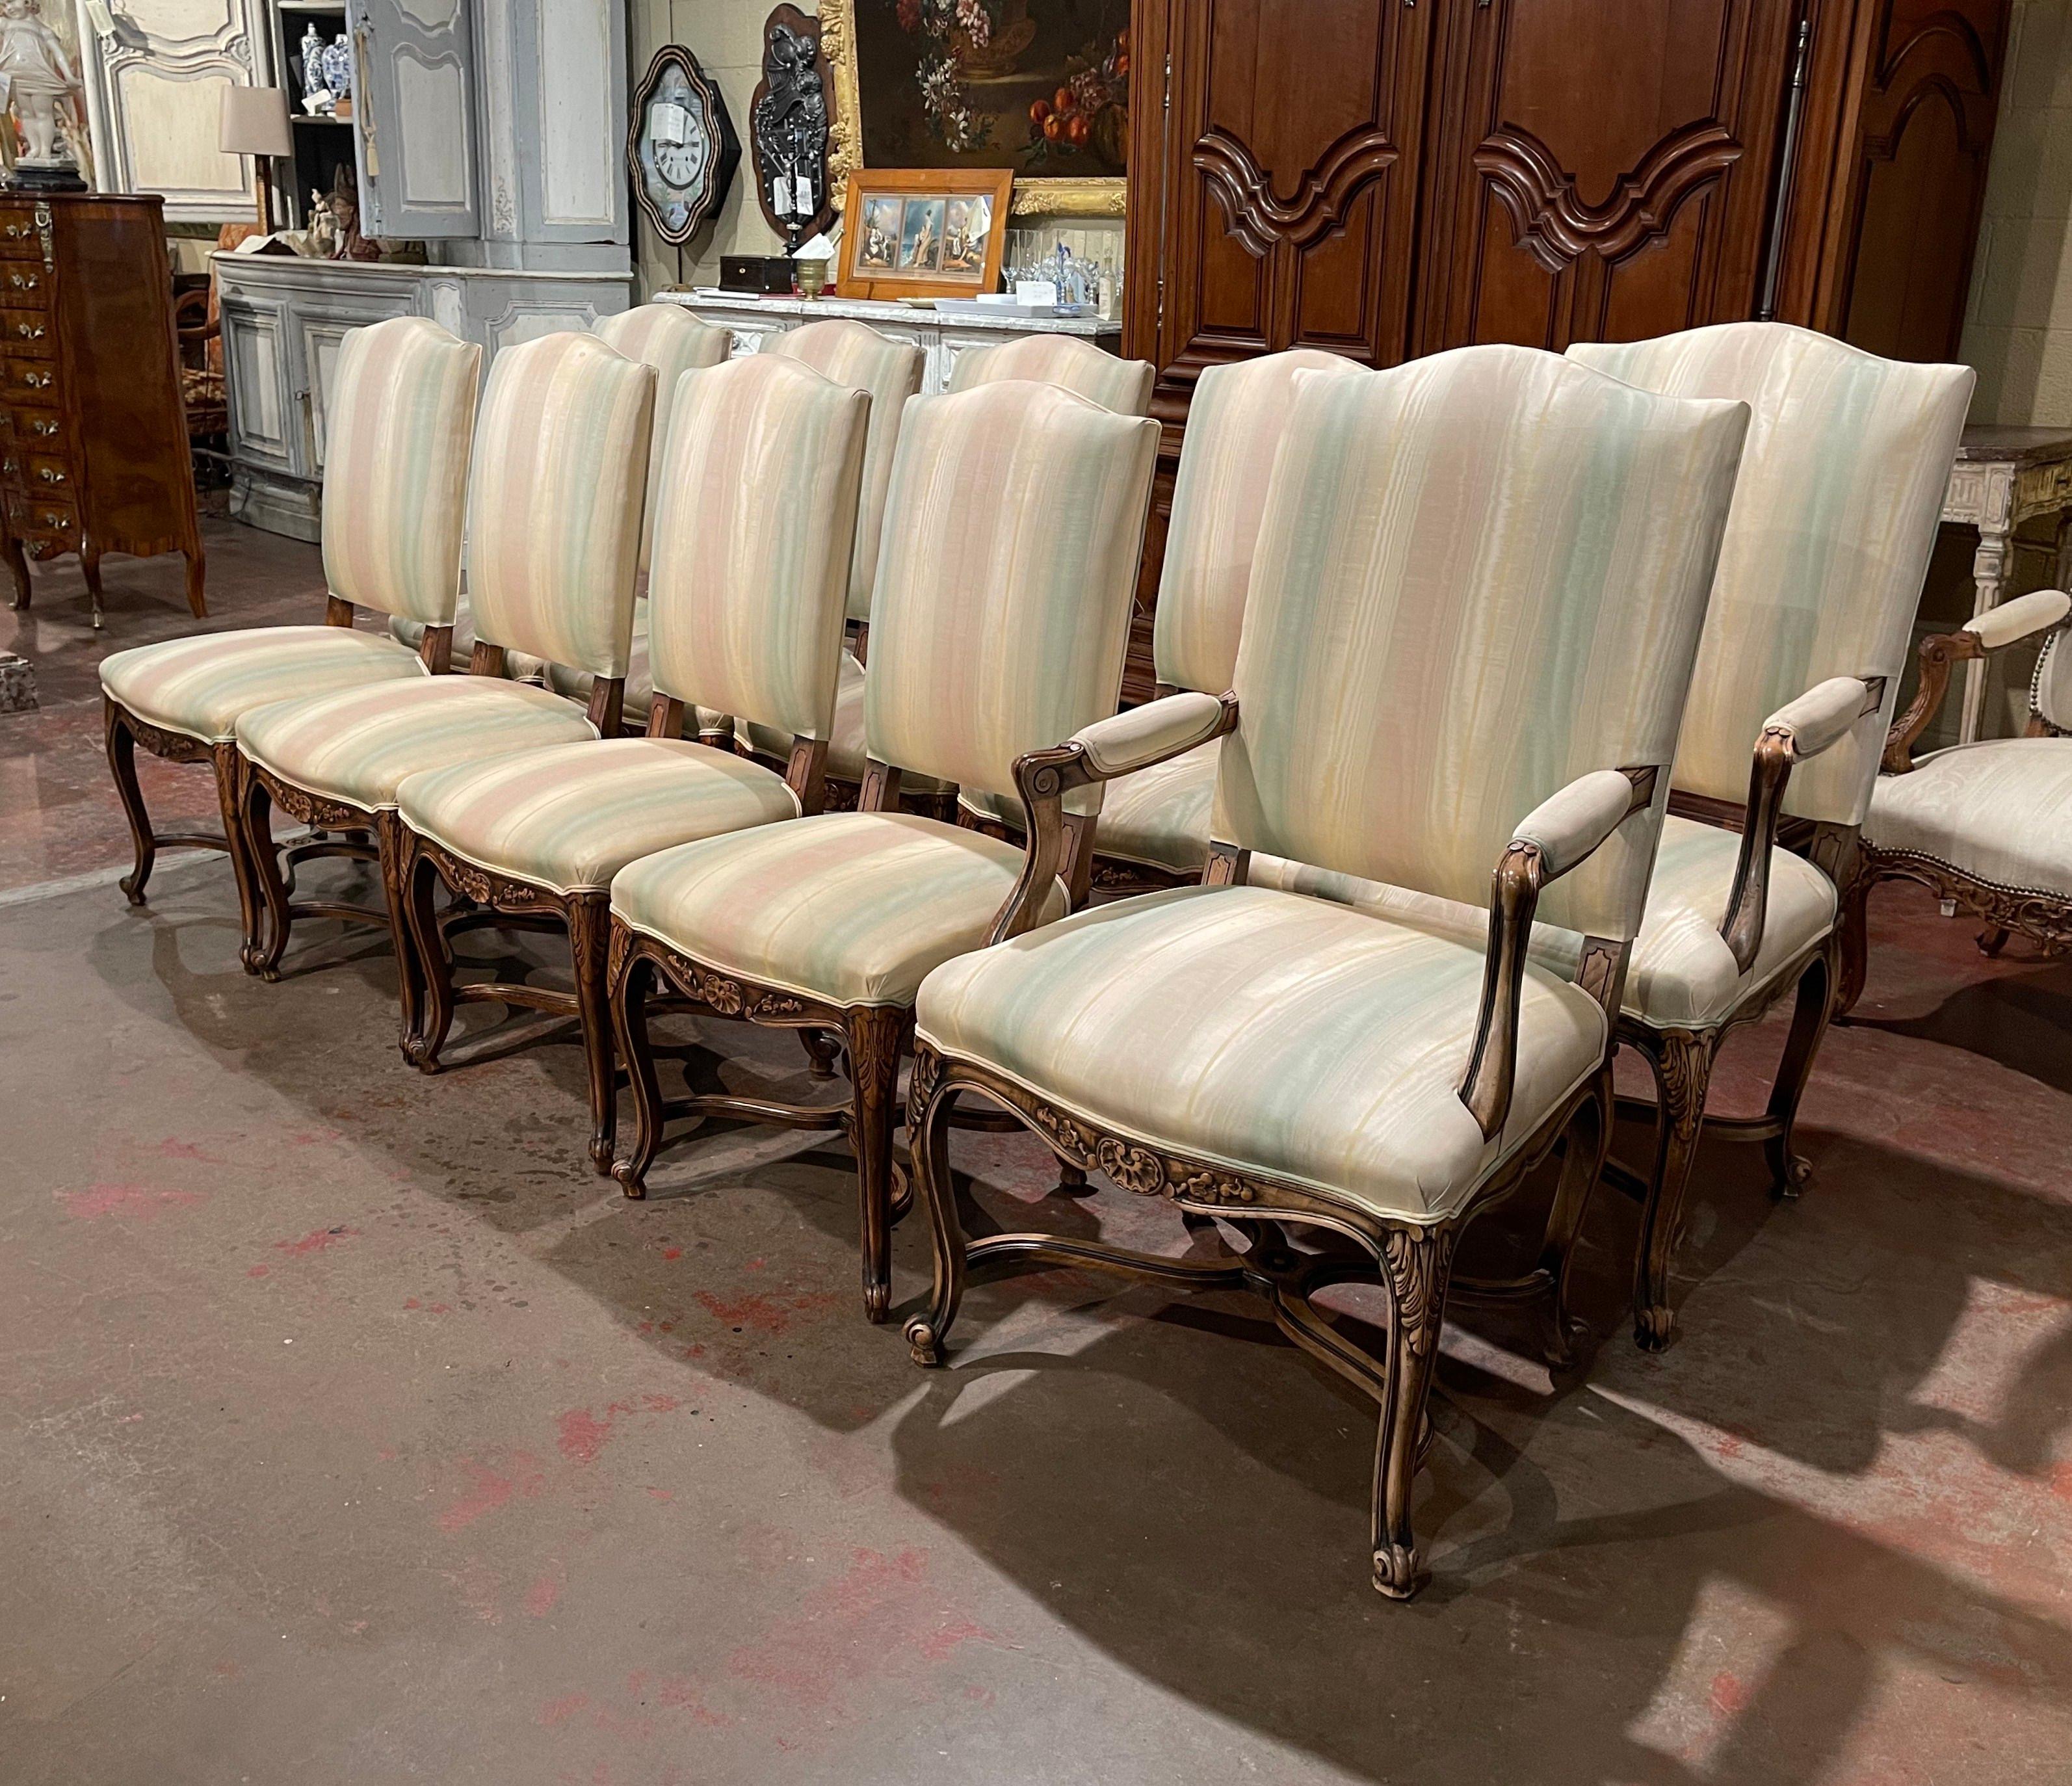 Decorate a dining table with this elegant suite of ten dining chairs and matching armchairs. Crafted in Provence, France circa 1920, each piece stands on cabriole legs decorated with acanthus leaves at the shoulder and ending with escargot feet,